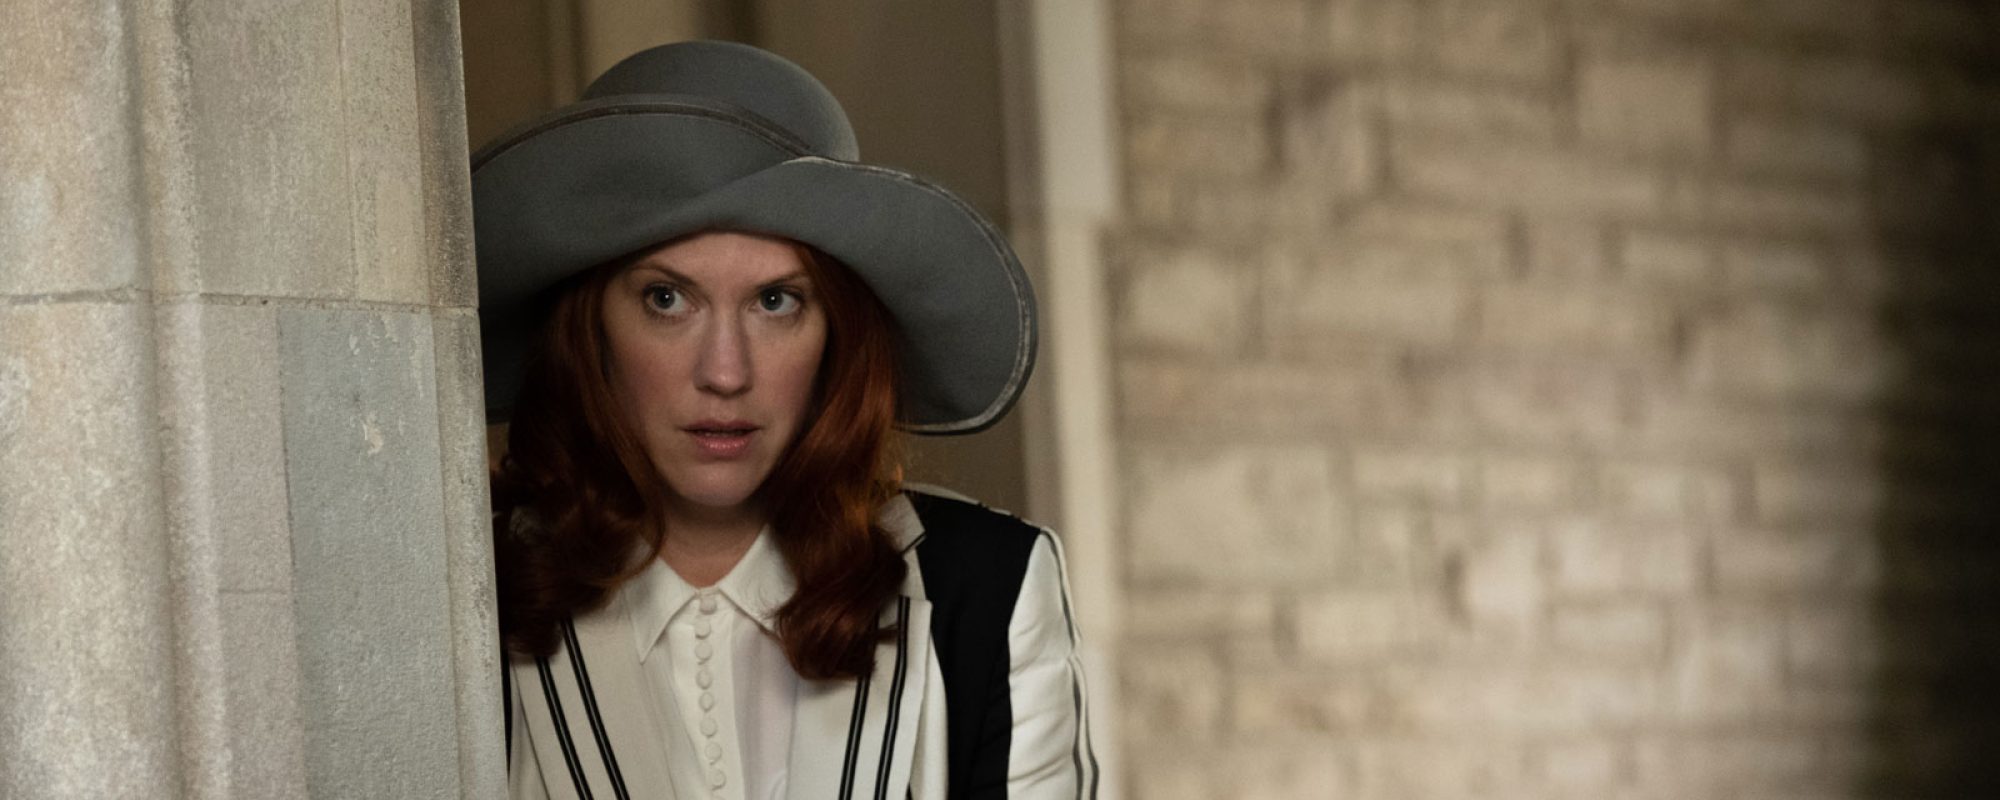 OVATION IS ON THE CASE AS FRANKIE DRAKE MYSTERIES  RETURNS FOR SEASON TWO ON JULY 27